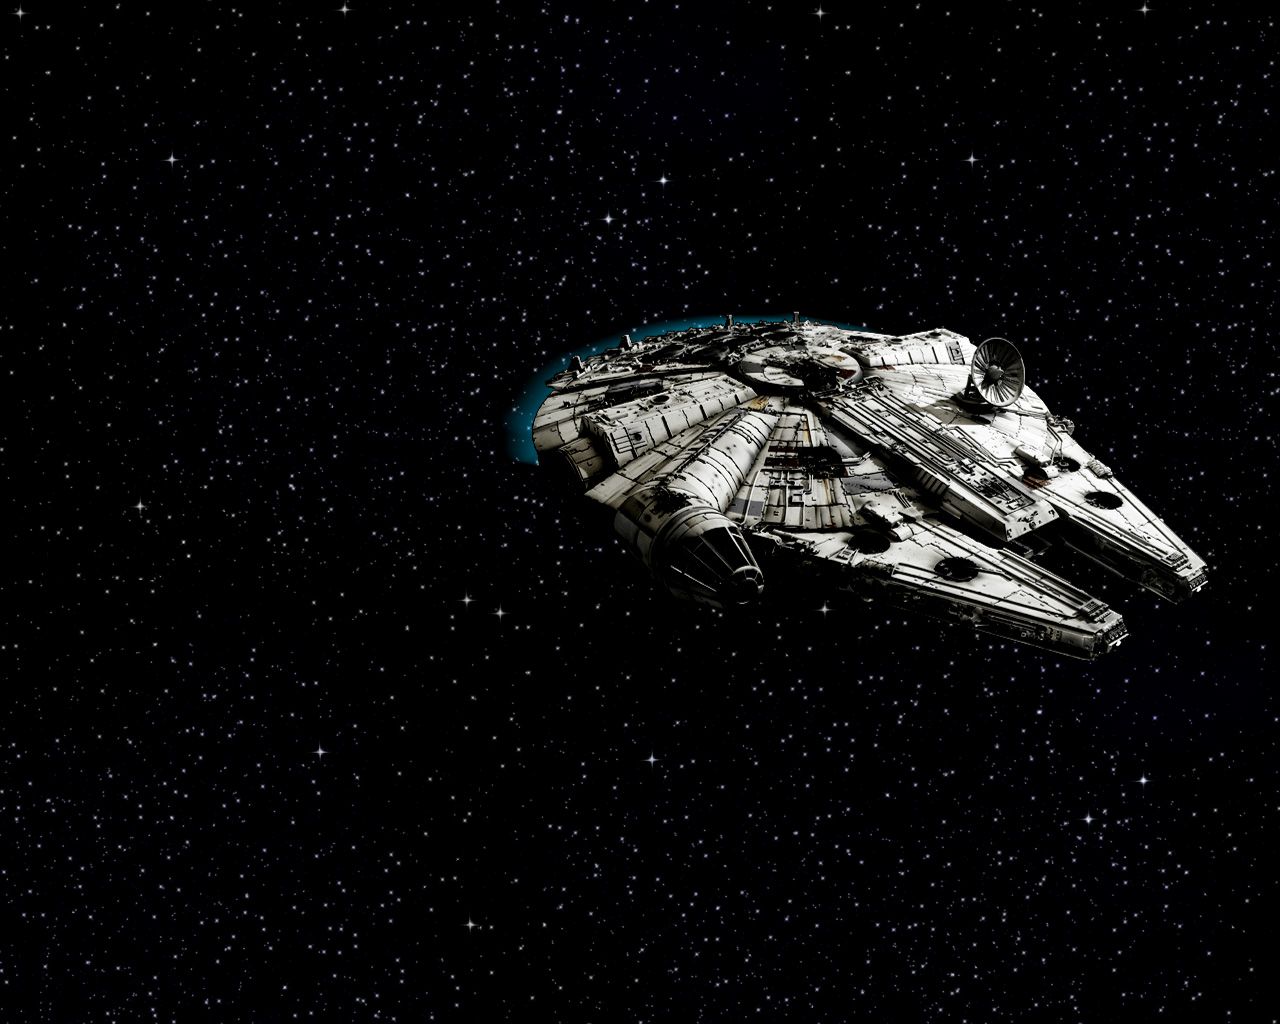 Star Wars Wallpaper HD Millennium Falcon Falcon May The Force Be With You